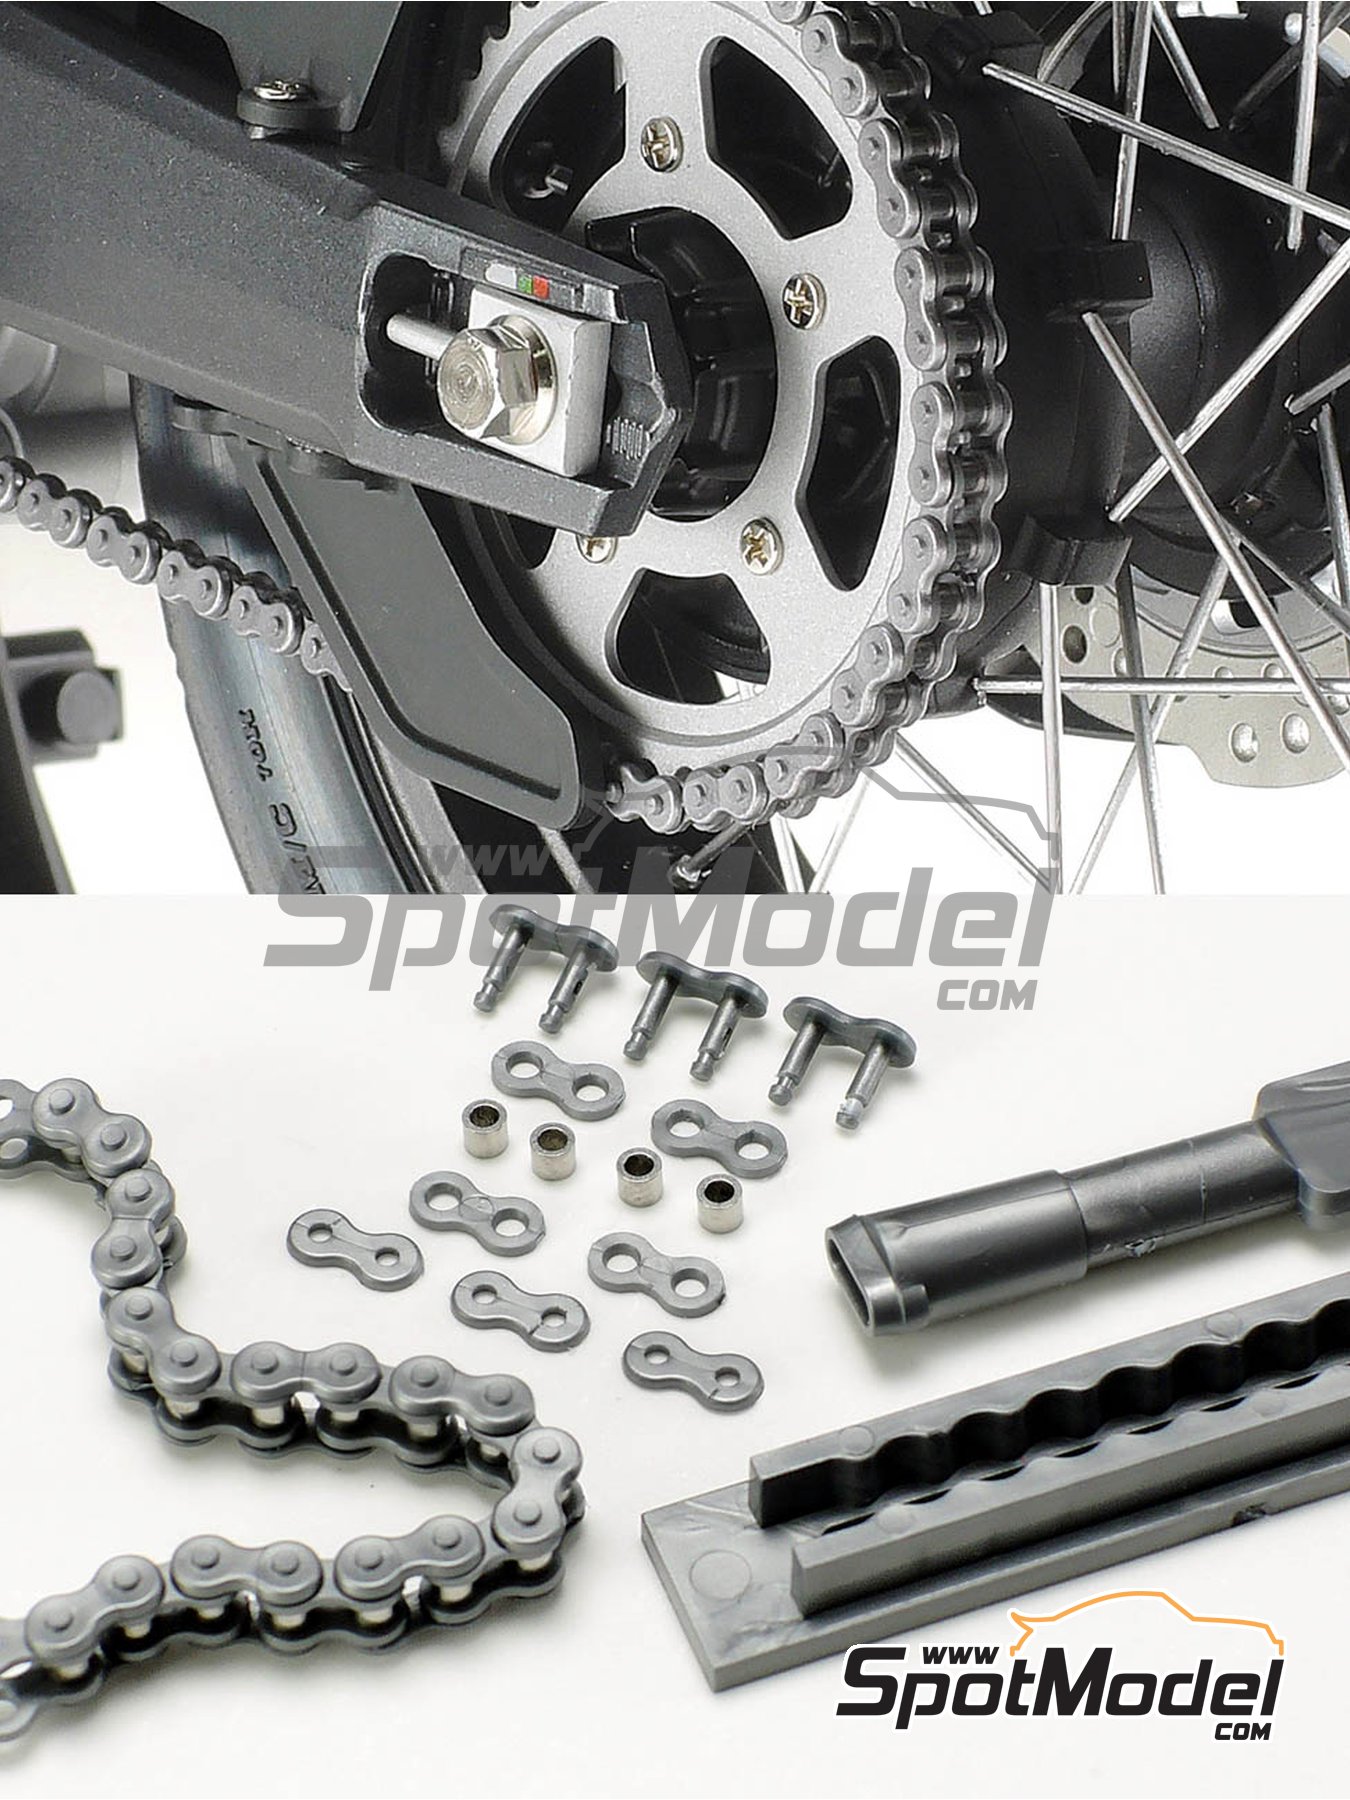 Tamiya Detail-Up Parts Assembly Chain Set for 1/6 Motorcycle # 12674 